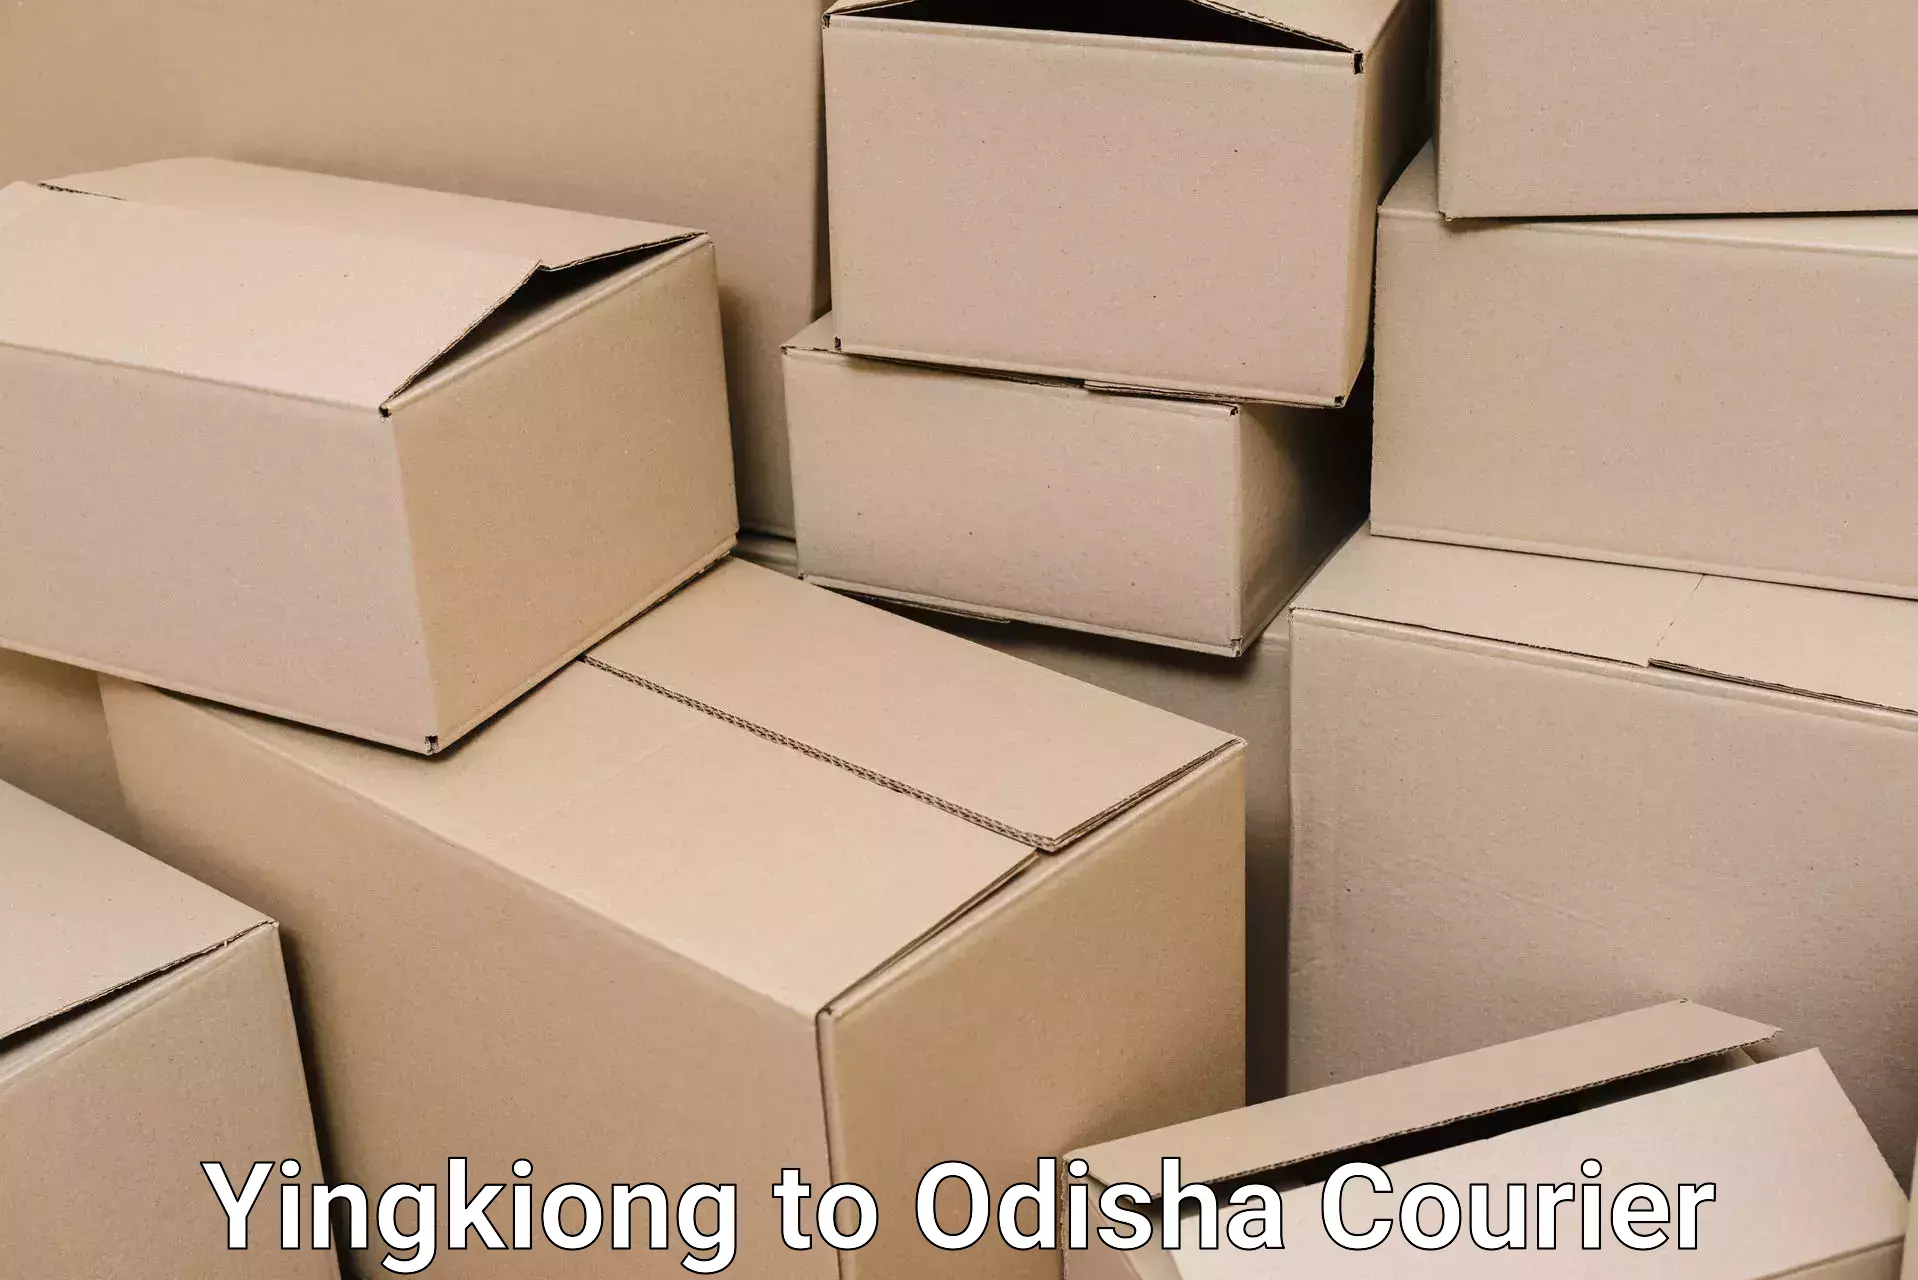 Residential moving experts Yingkiong to Odisha